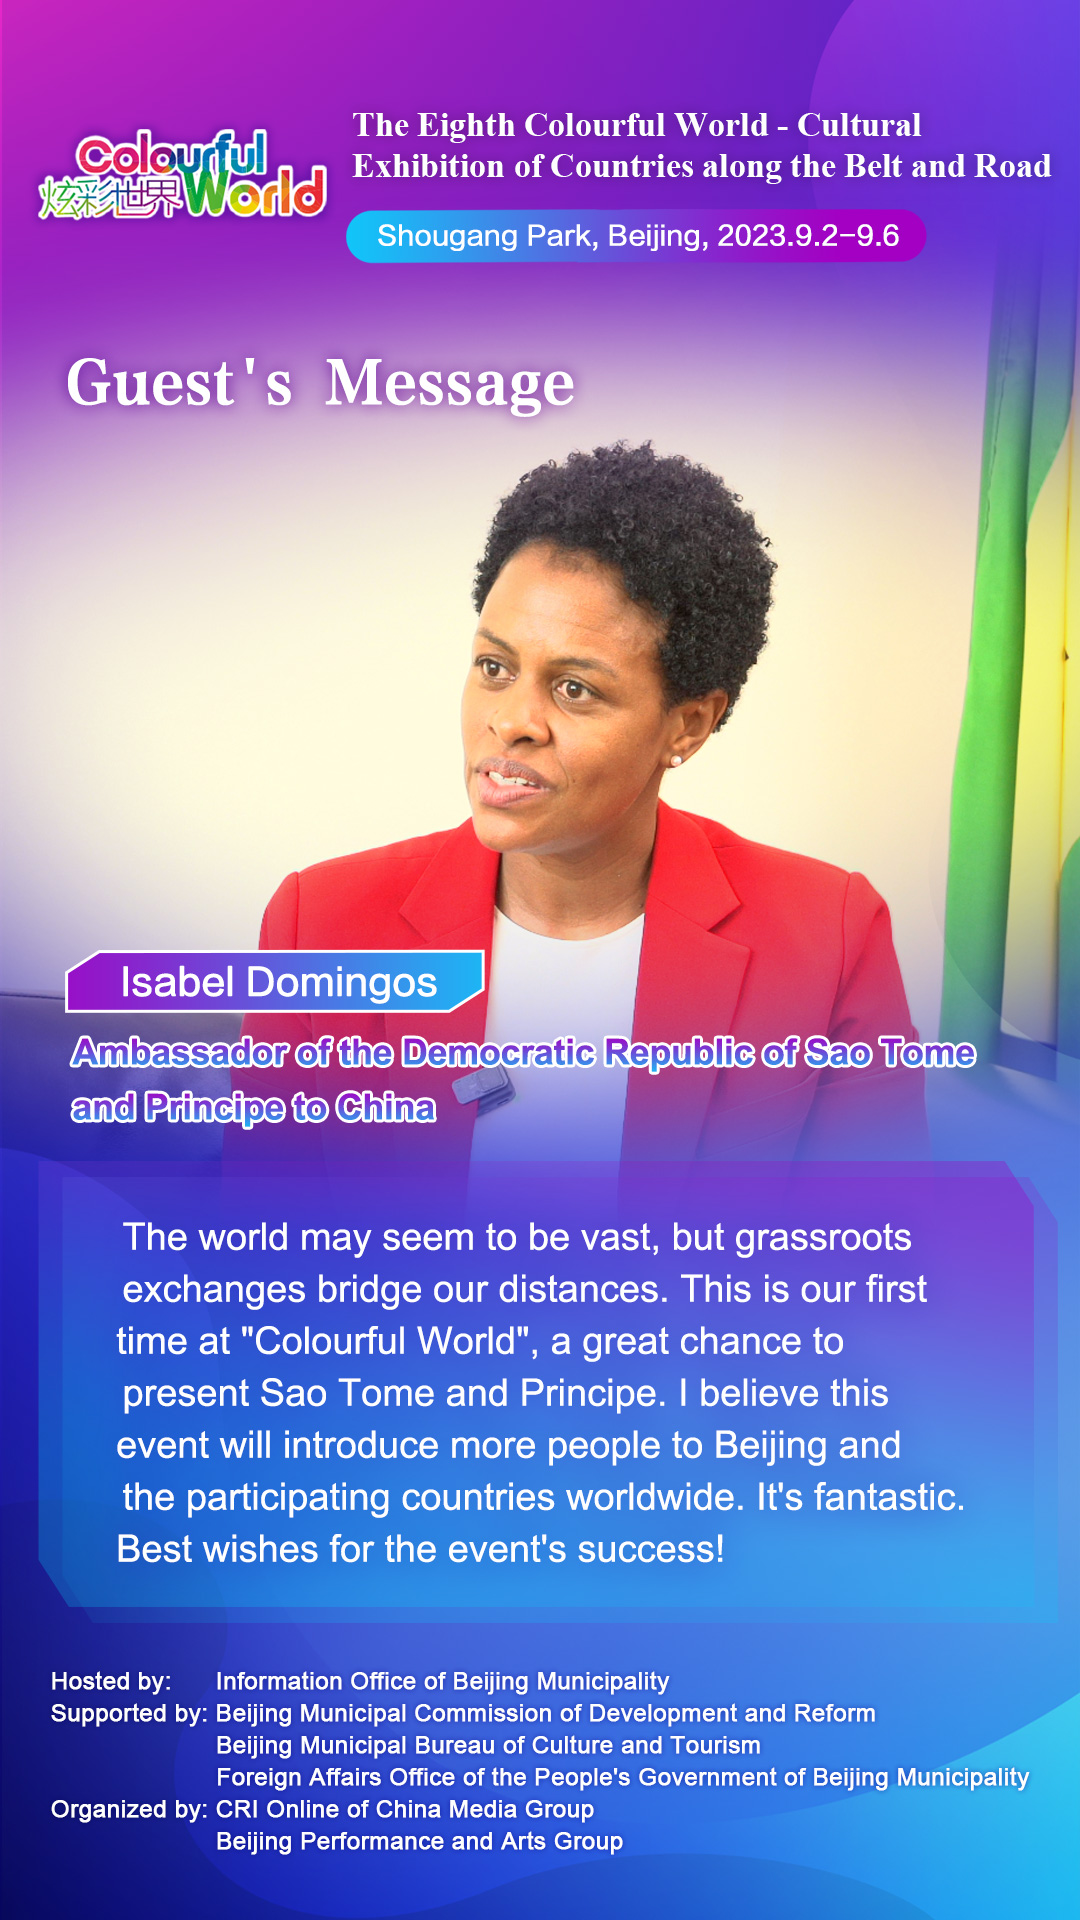 Guest’s Message - Isabel Domingos, Ambassador of the Democratic Republic of Sao Tome and Principe to China_fororder_第八屆“炫彩世界”-金句海報-English-聖多美和普林西比(1)